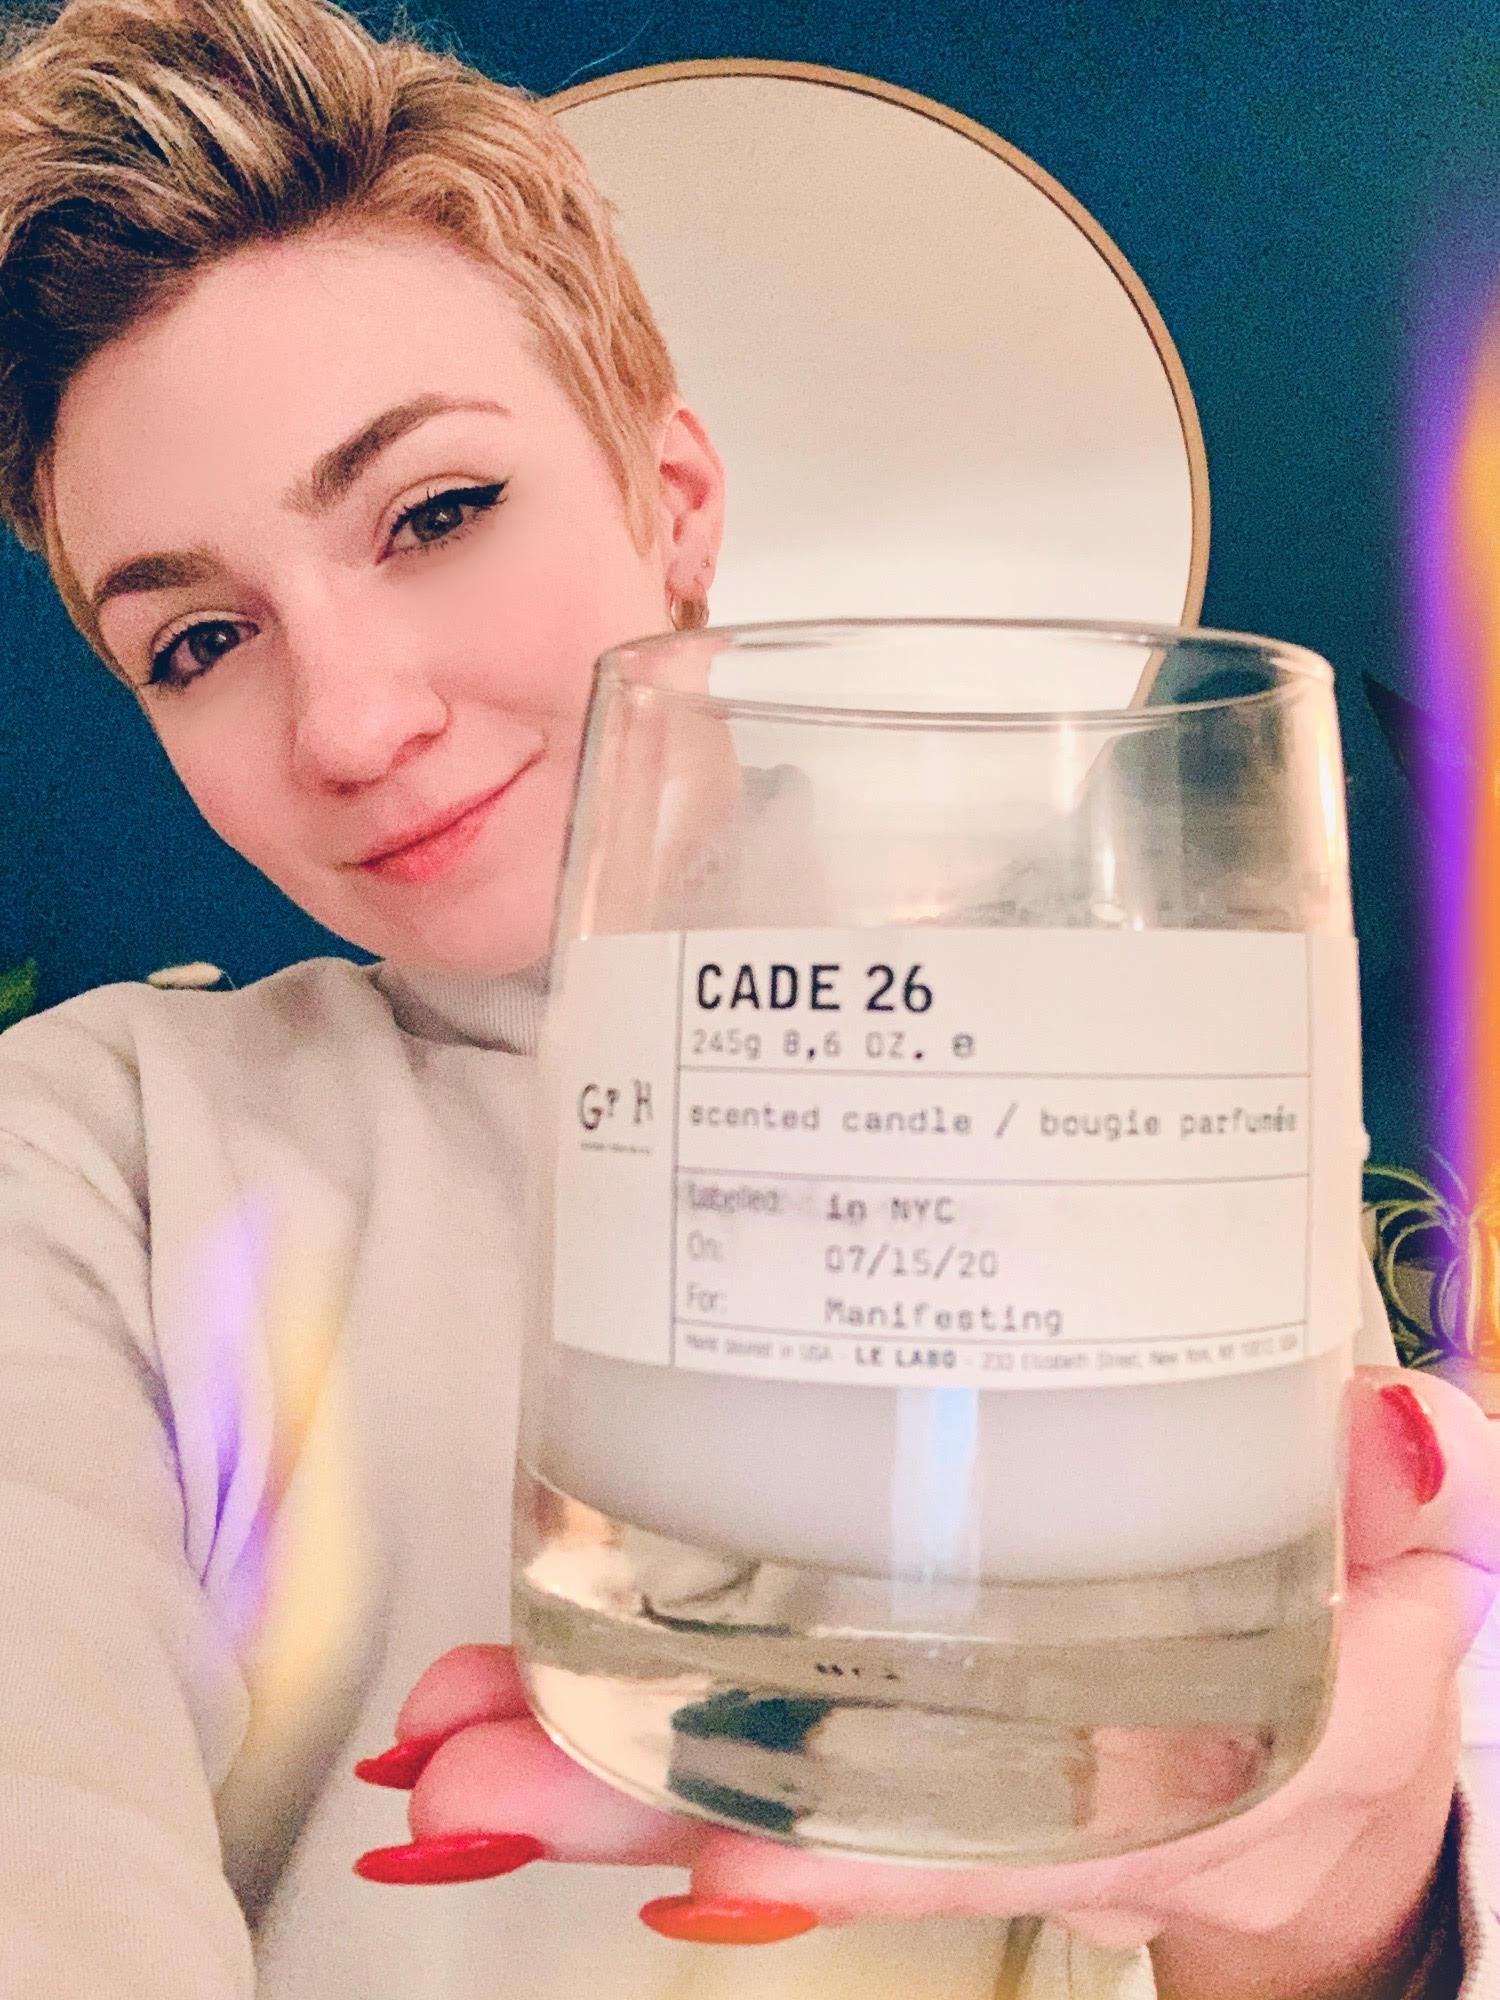 Garcia-Lee, a white woman with short blonde hair, holds a candle labeled "Cade 26" in her hand. She smiles, has bright red nail polish on, and wears a light-colored sweatshirt.